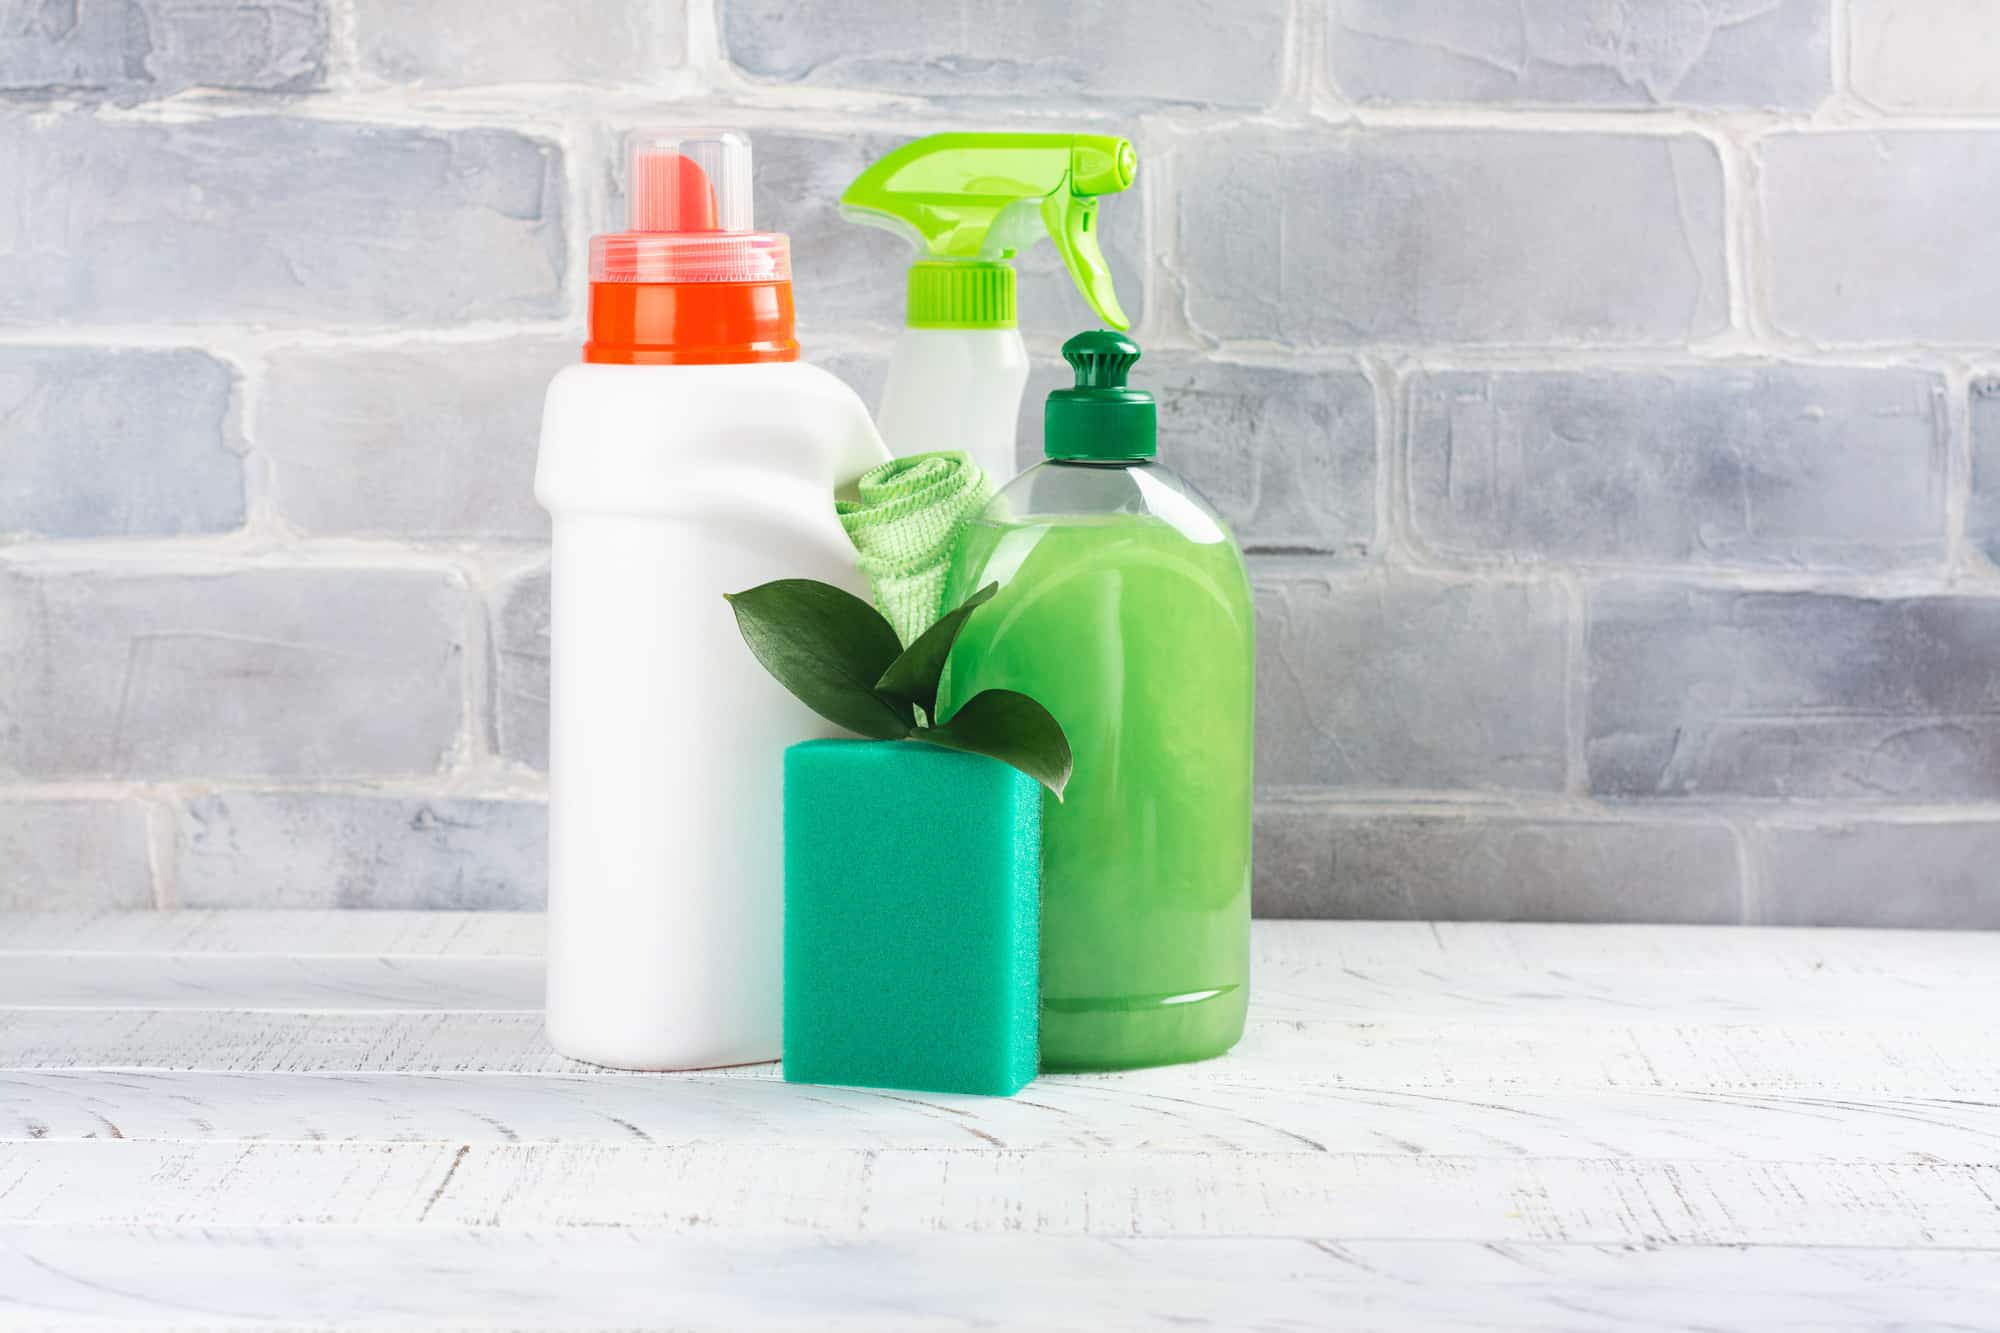 White and green bottles of cleaning solutions in front of a grey stone wall.